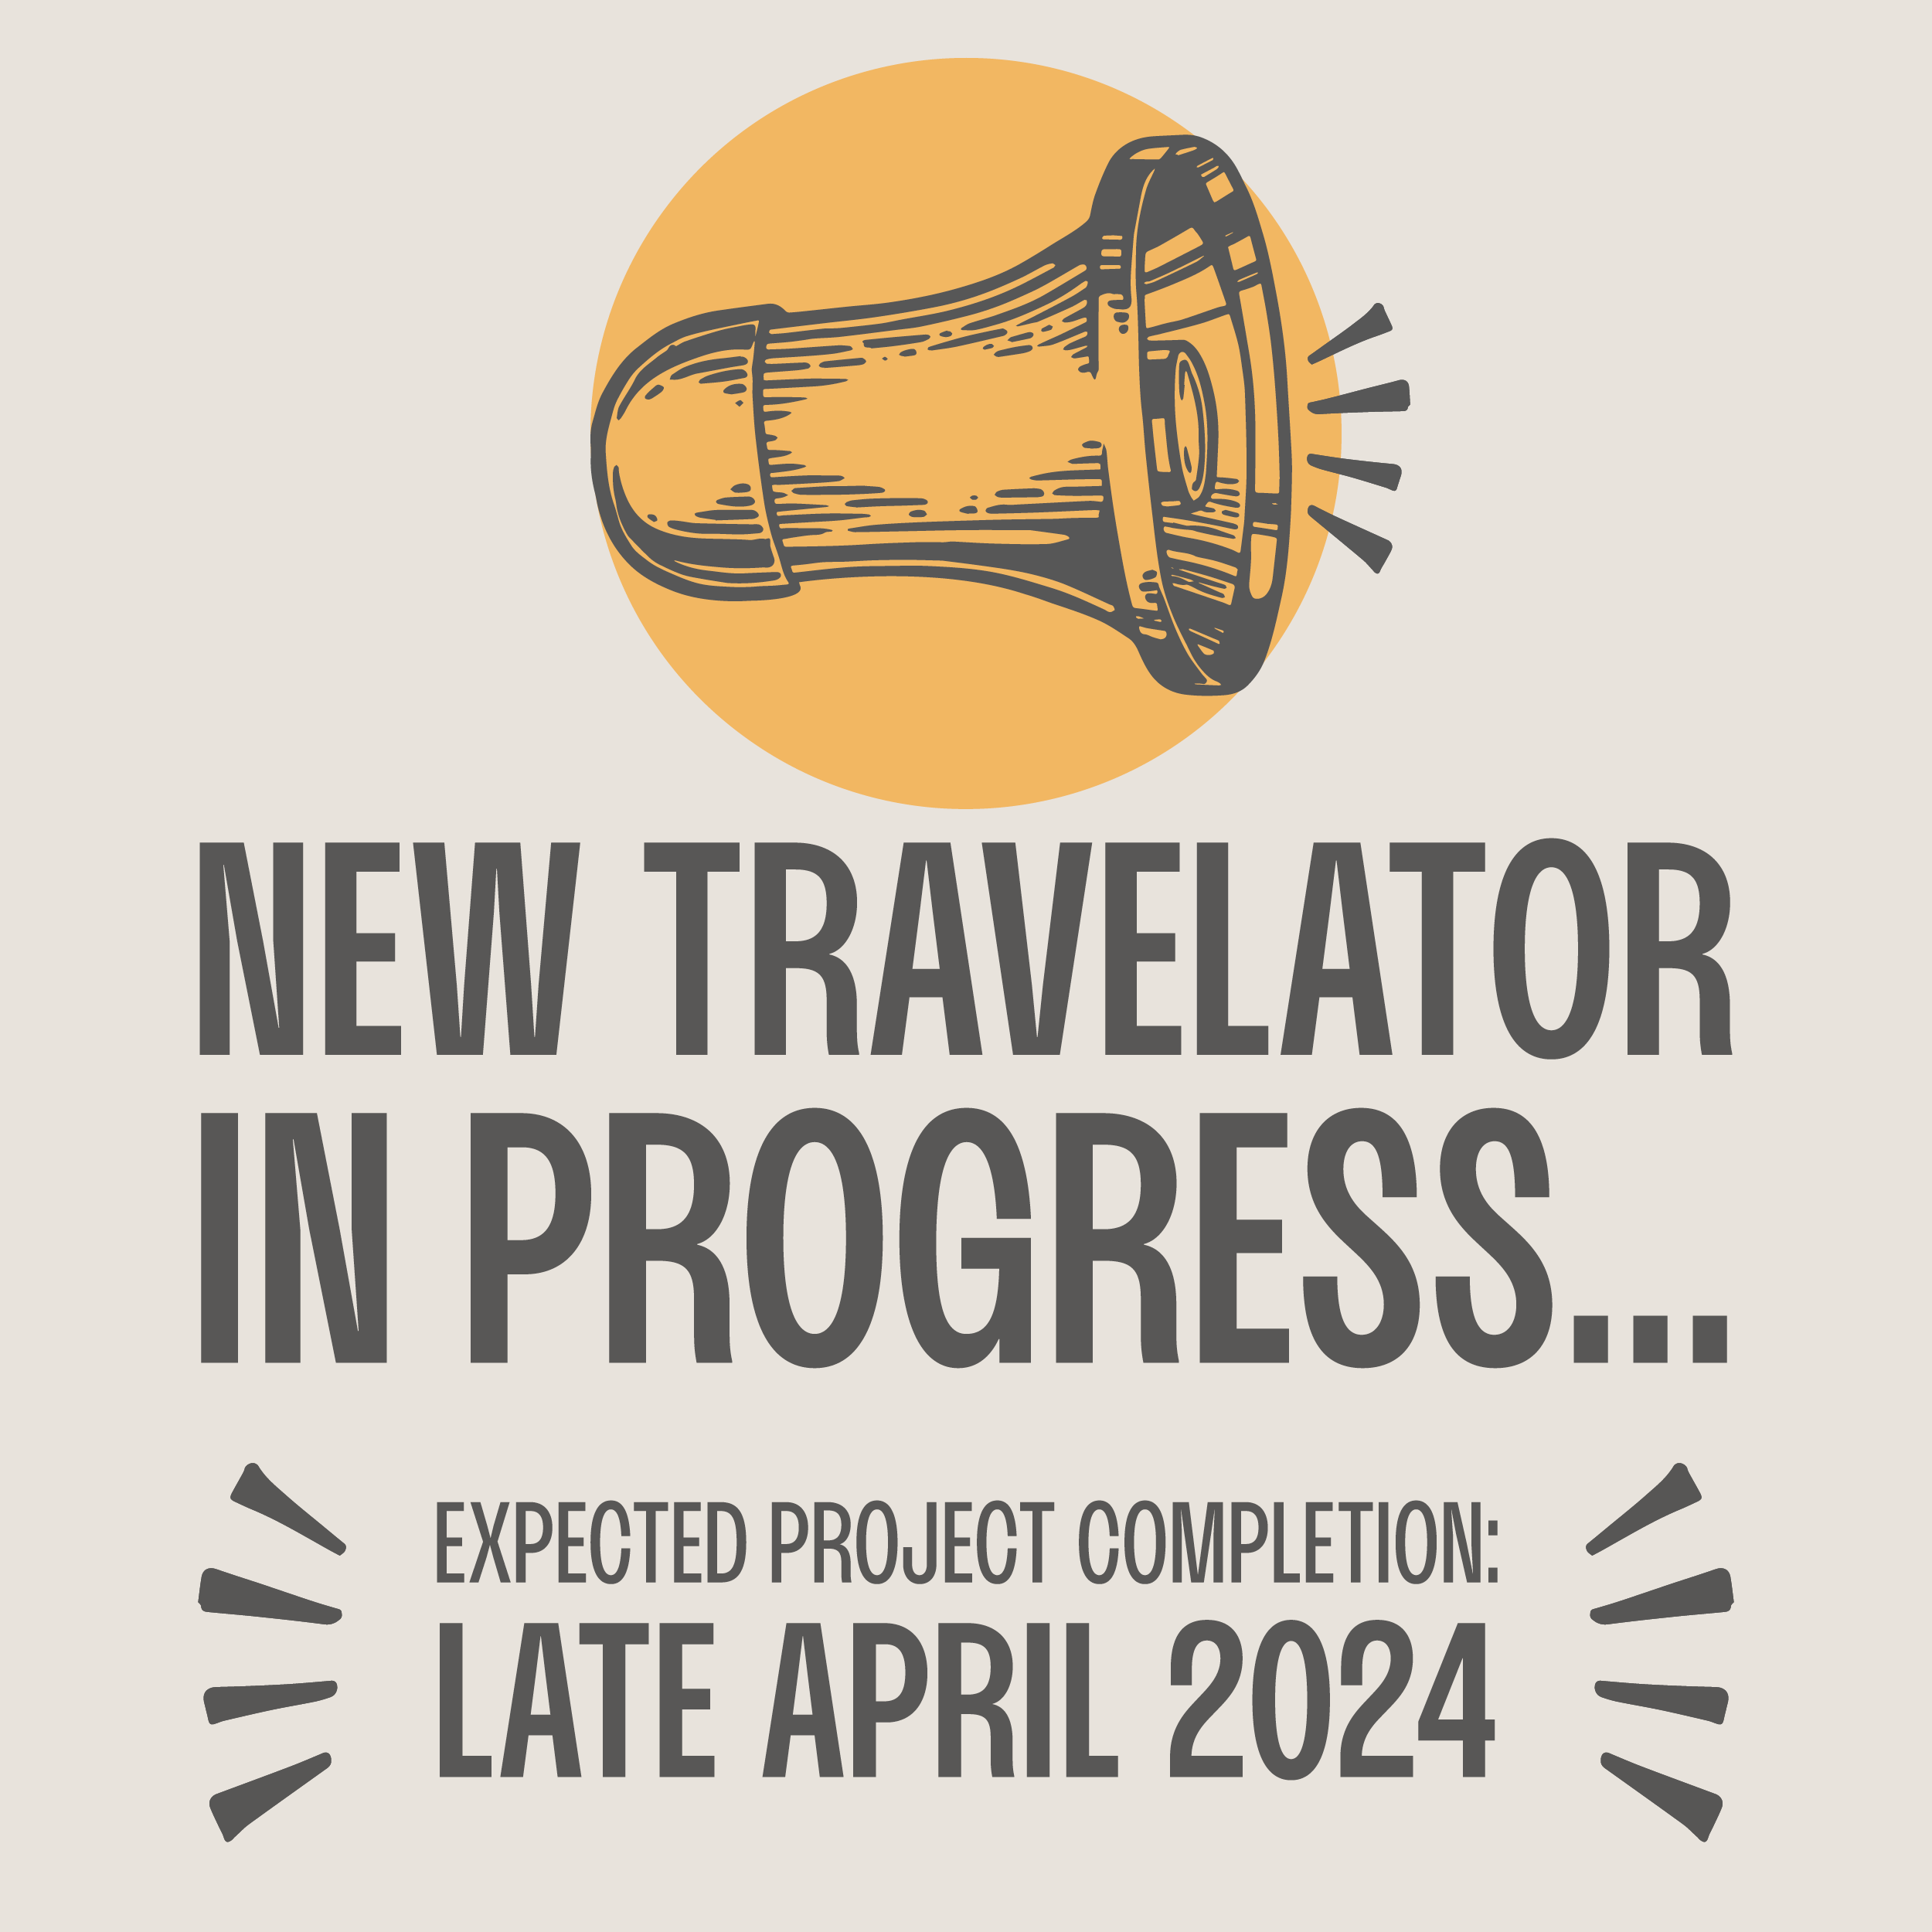 NEW TRAVELATOR IN PROGRESS... Expected project completion: late April 2024